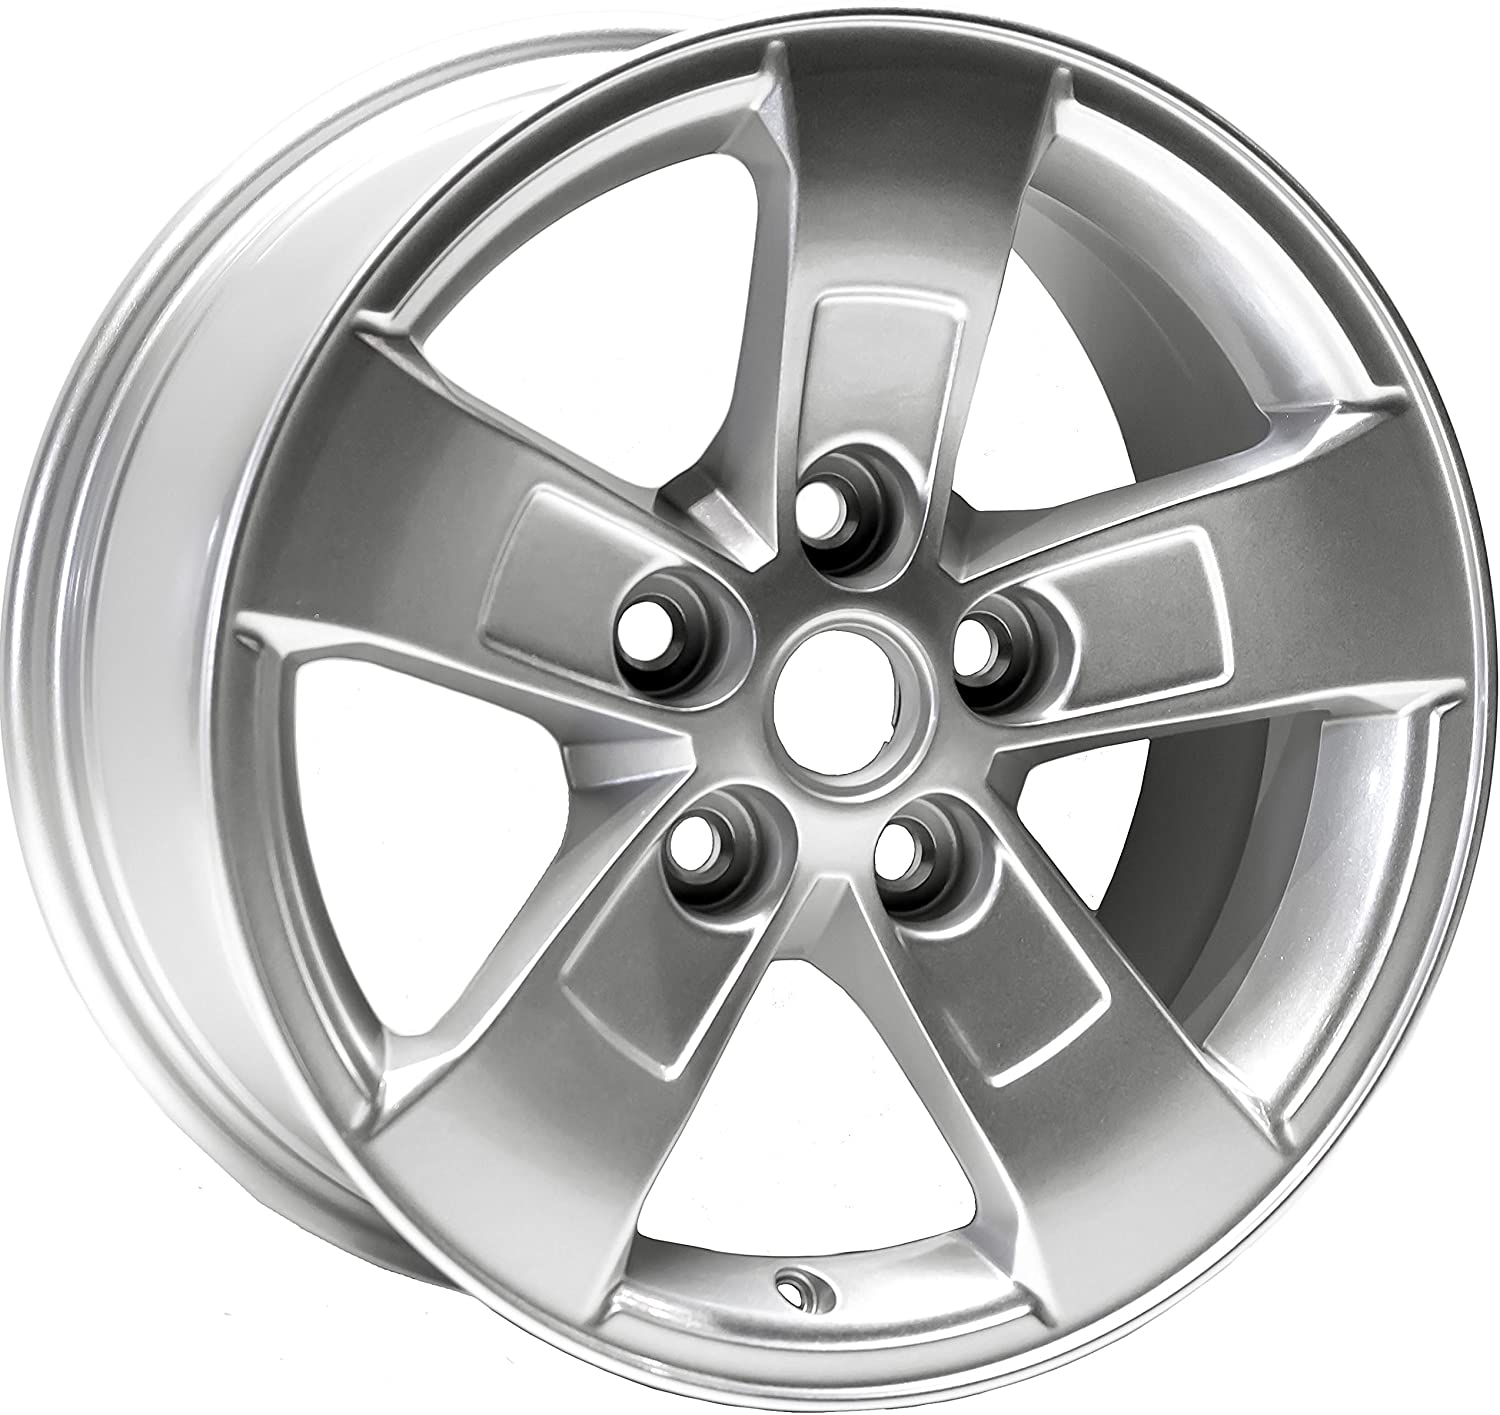 Dorman Alloy Wheel with Painted Finish (16 x 7.5 inches /5 x 120 inches, 41 mm Offset)